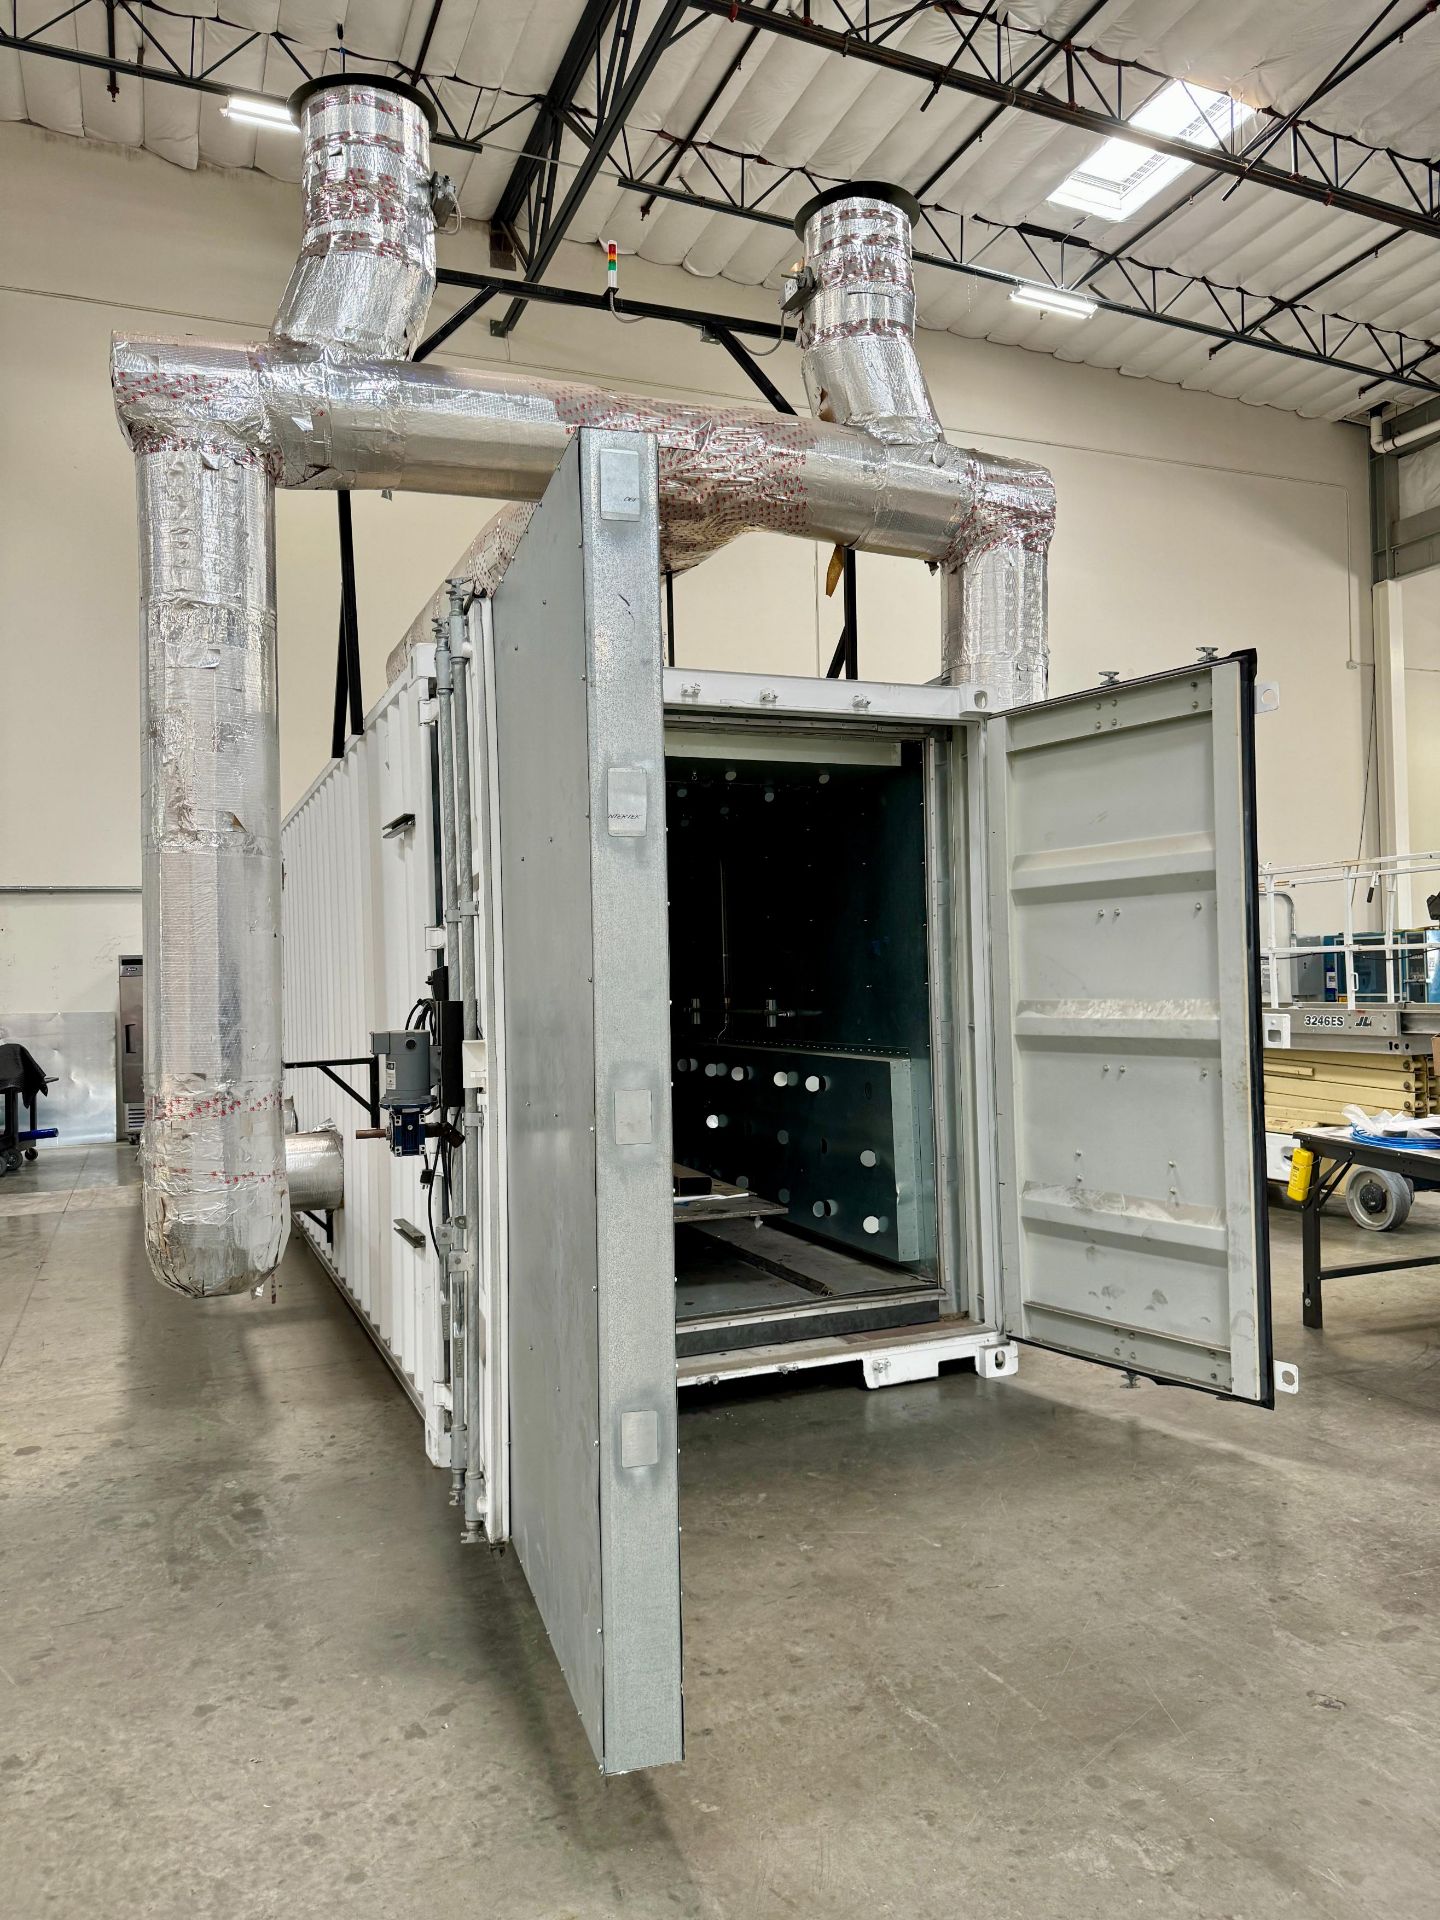 CURING OVEN, 38' X 6' CONTAINER, 350 DEGREES MAX, SIEMENS SIMATIC HMI TOUCH CONTROL, LOADING CART